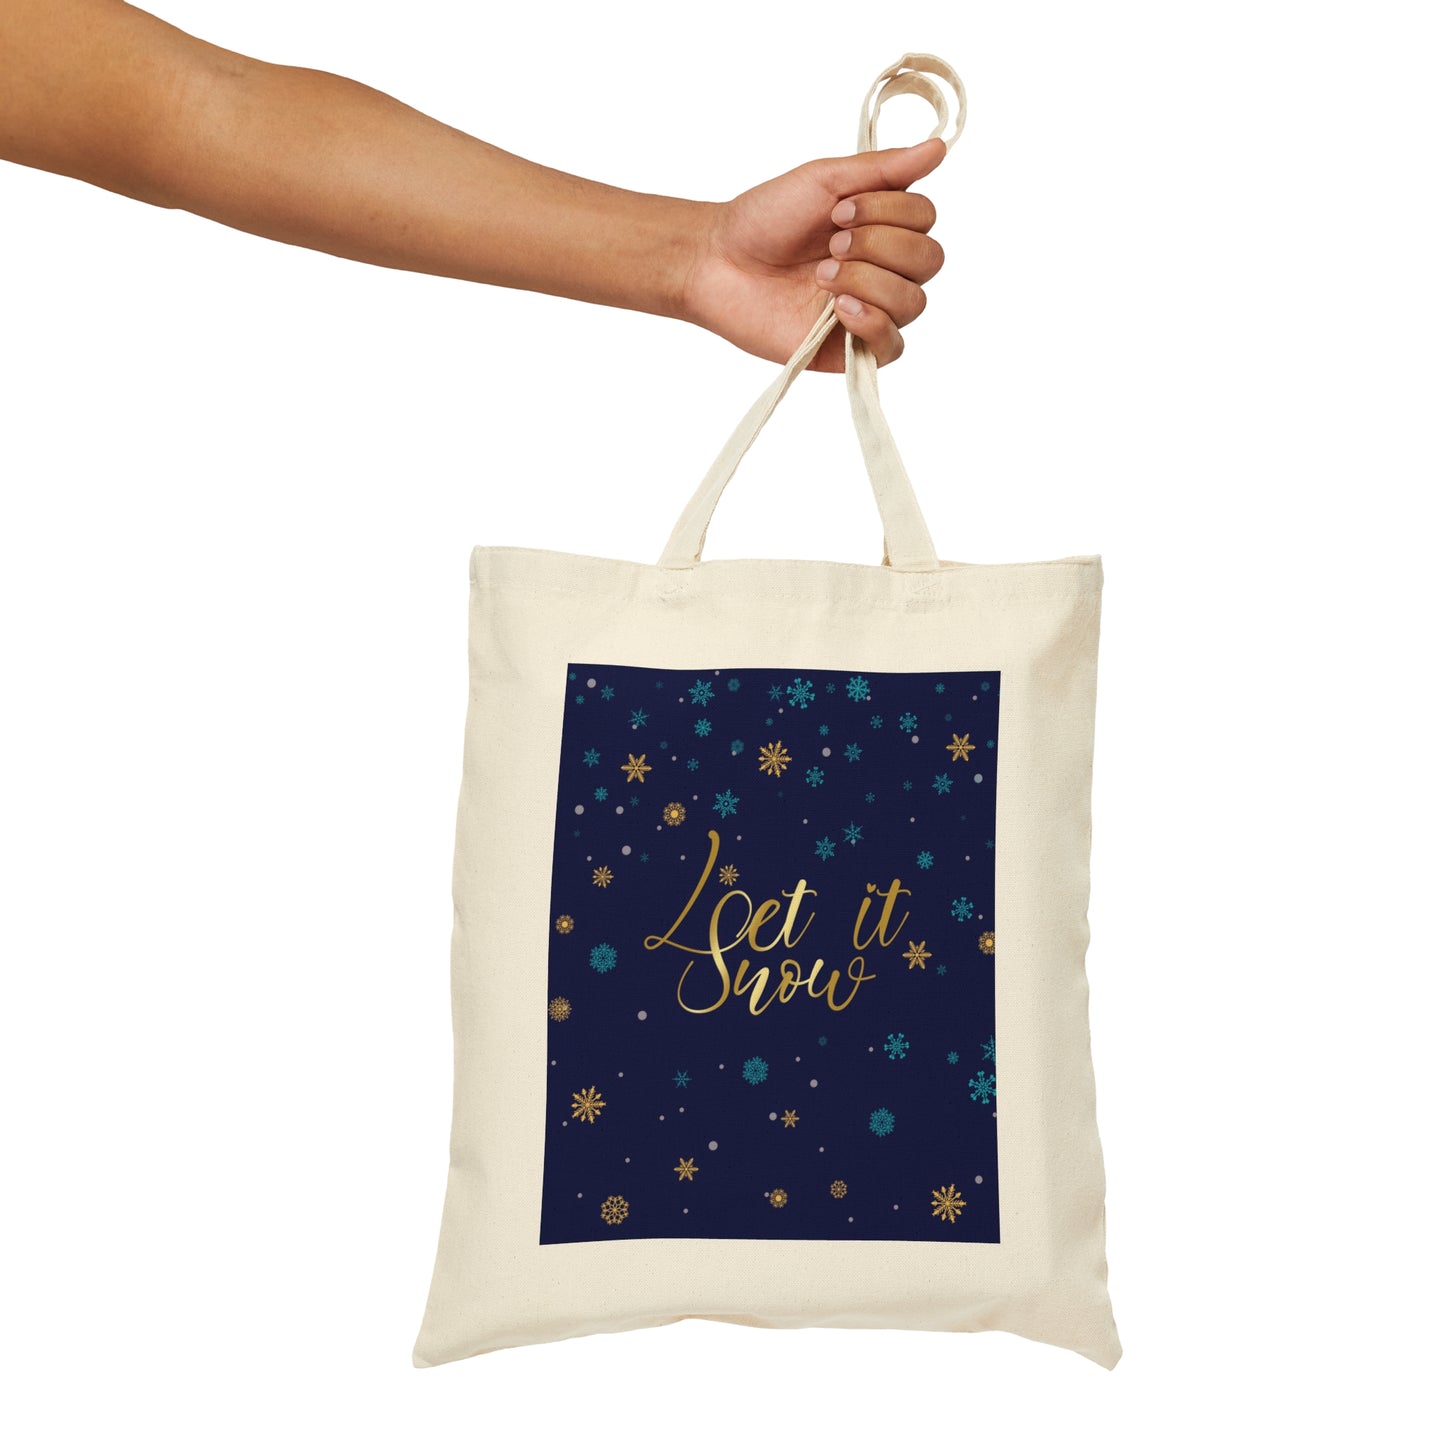 Let it Snow Pattern Christmas Typography Canvas Shopping Cotton Tote Bag